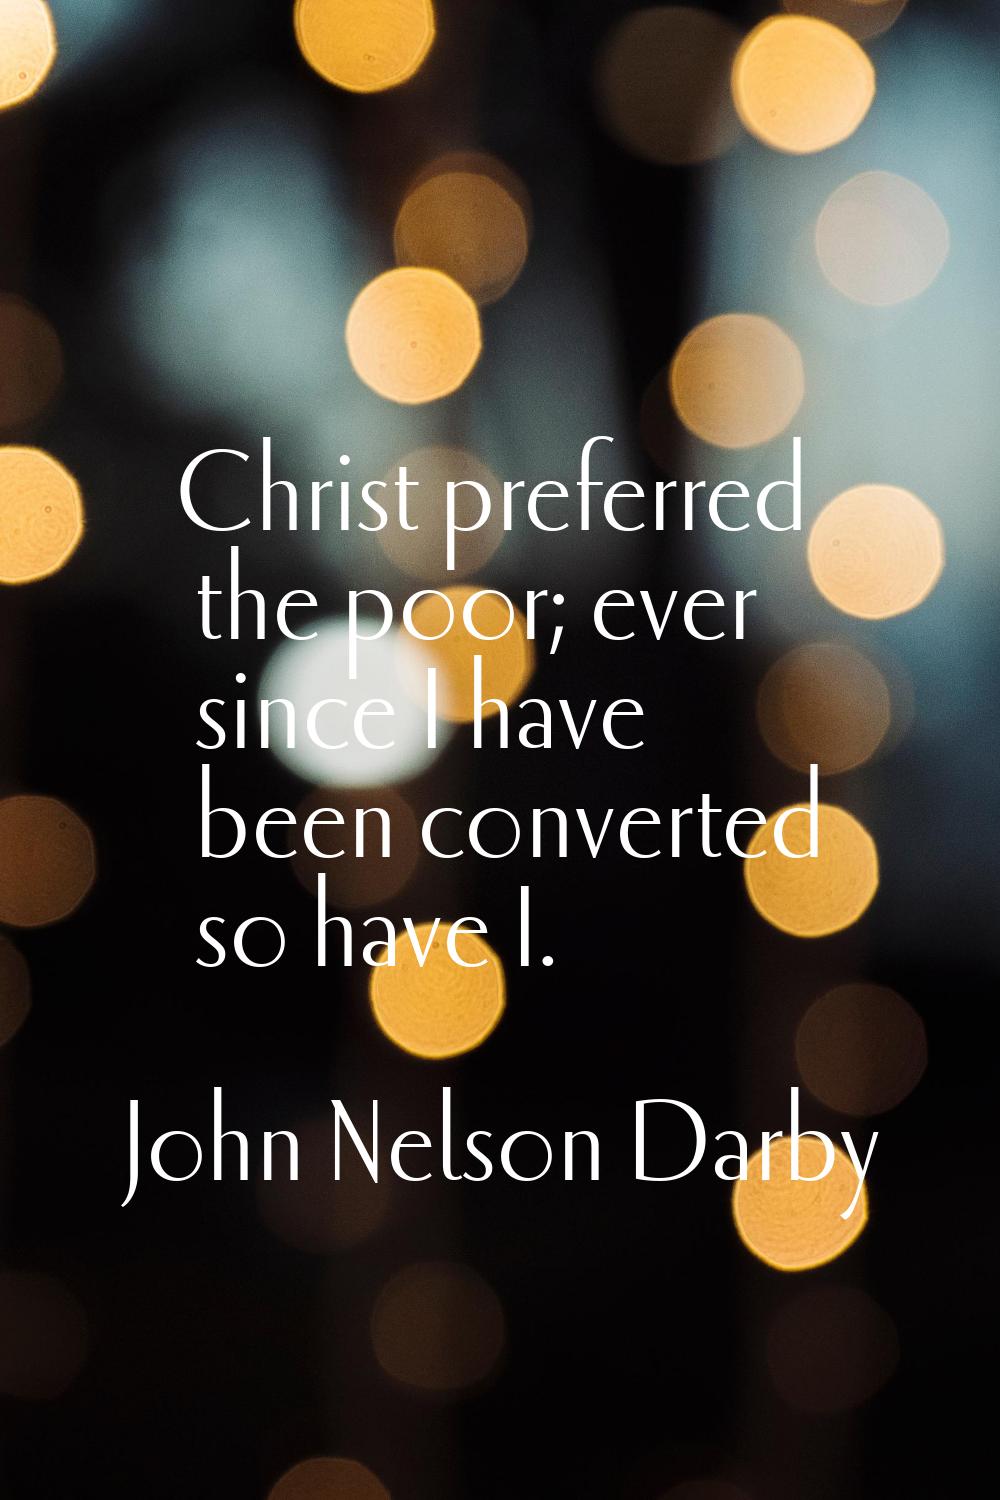 Christ preferred the poor; ever since I have been converted so have I.